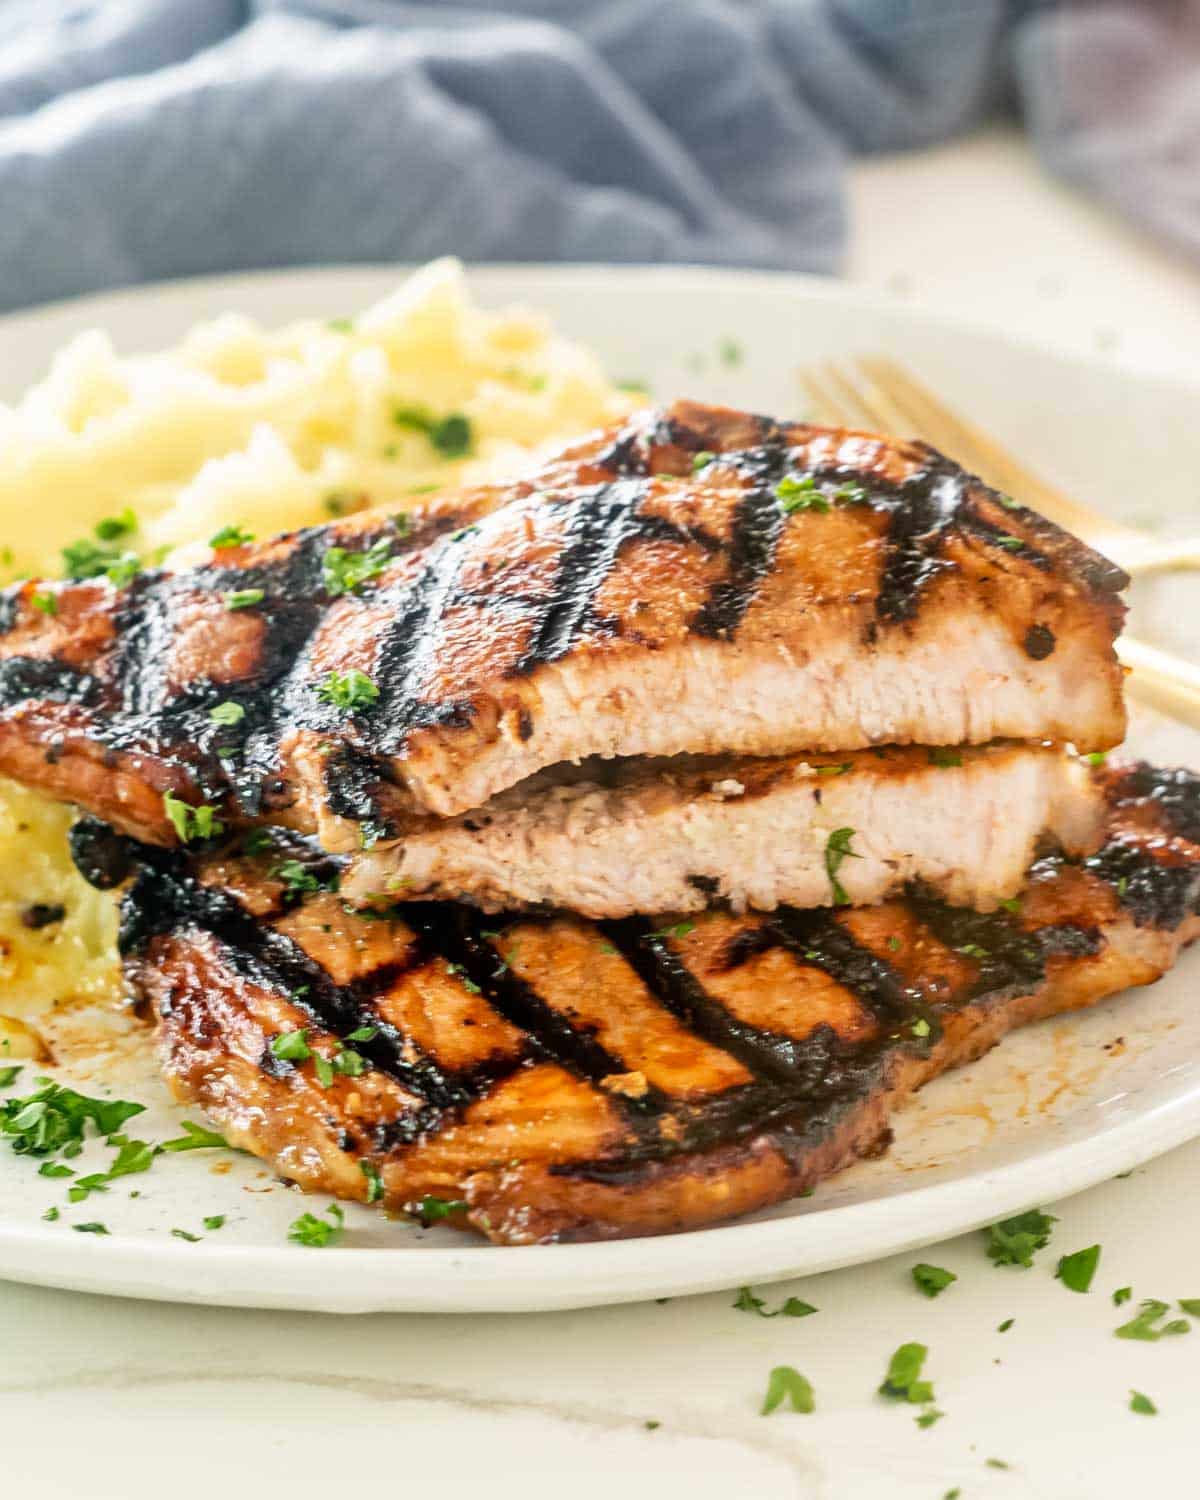 2 grilled pork chops with mashed potatoes on a plate.